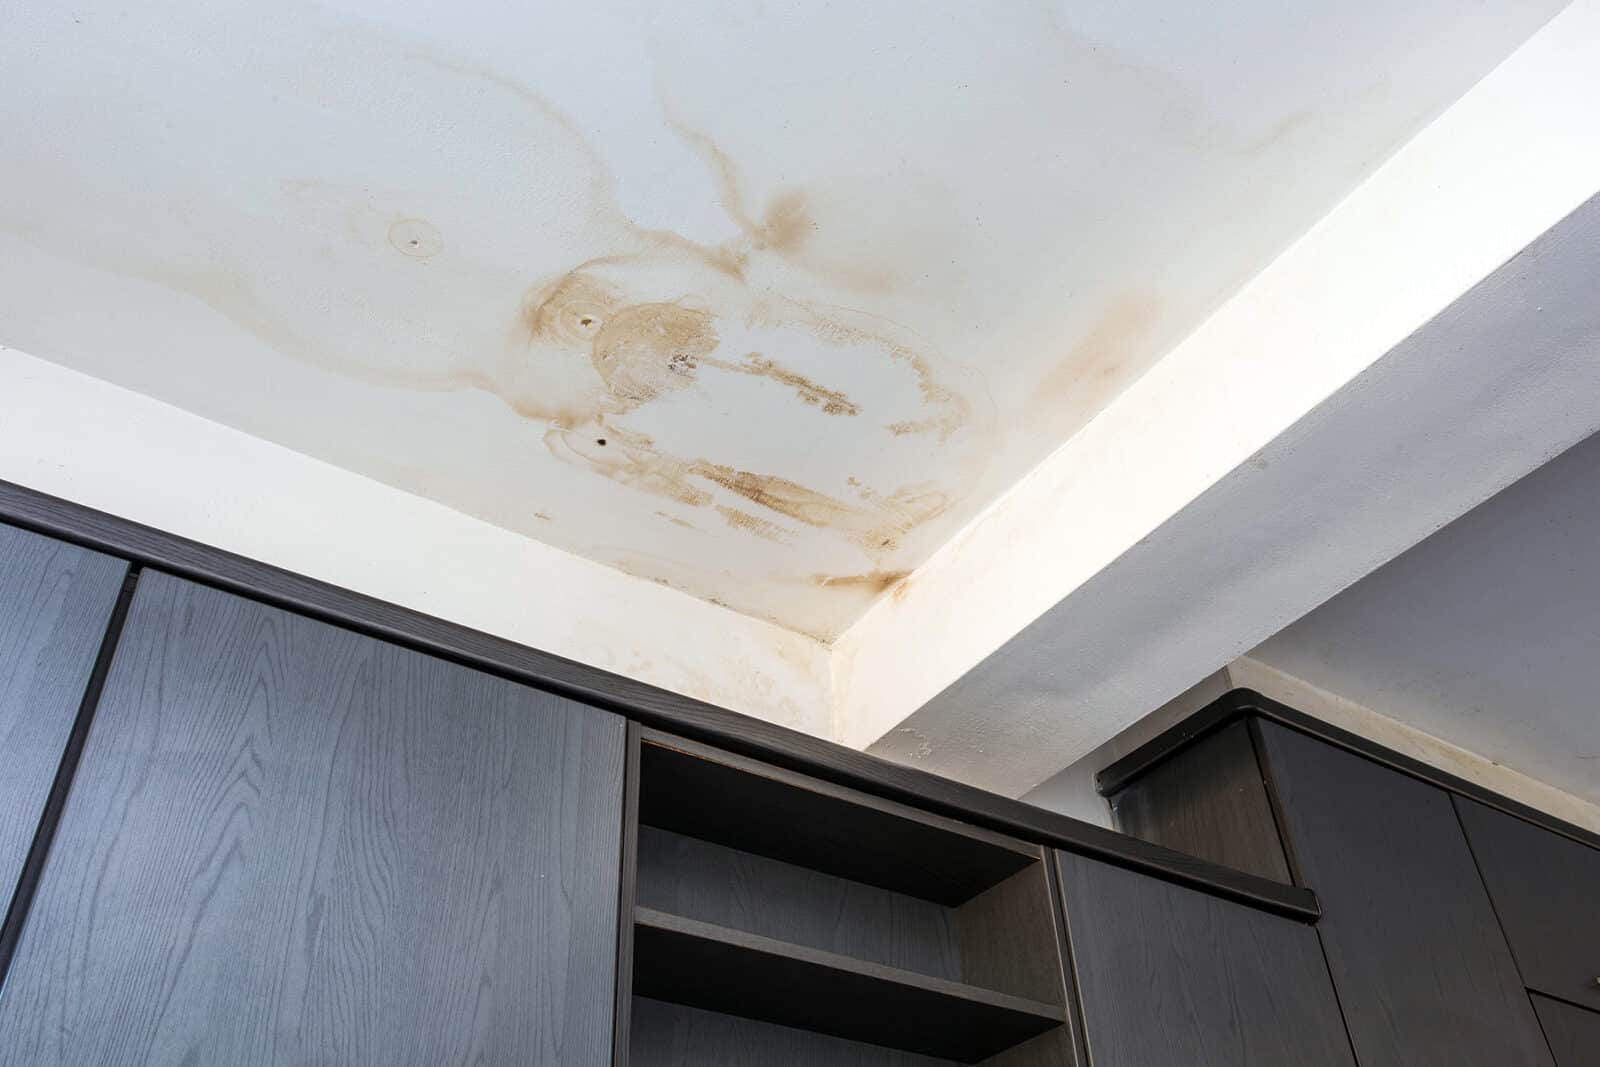 Yellow stains on ceiling.